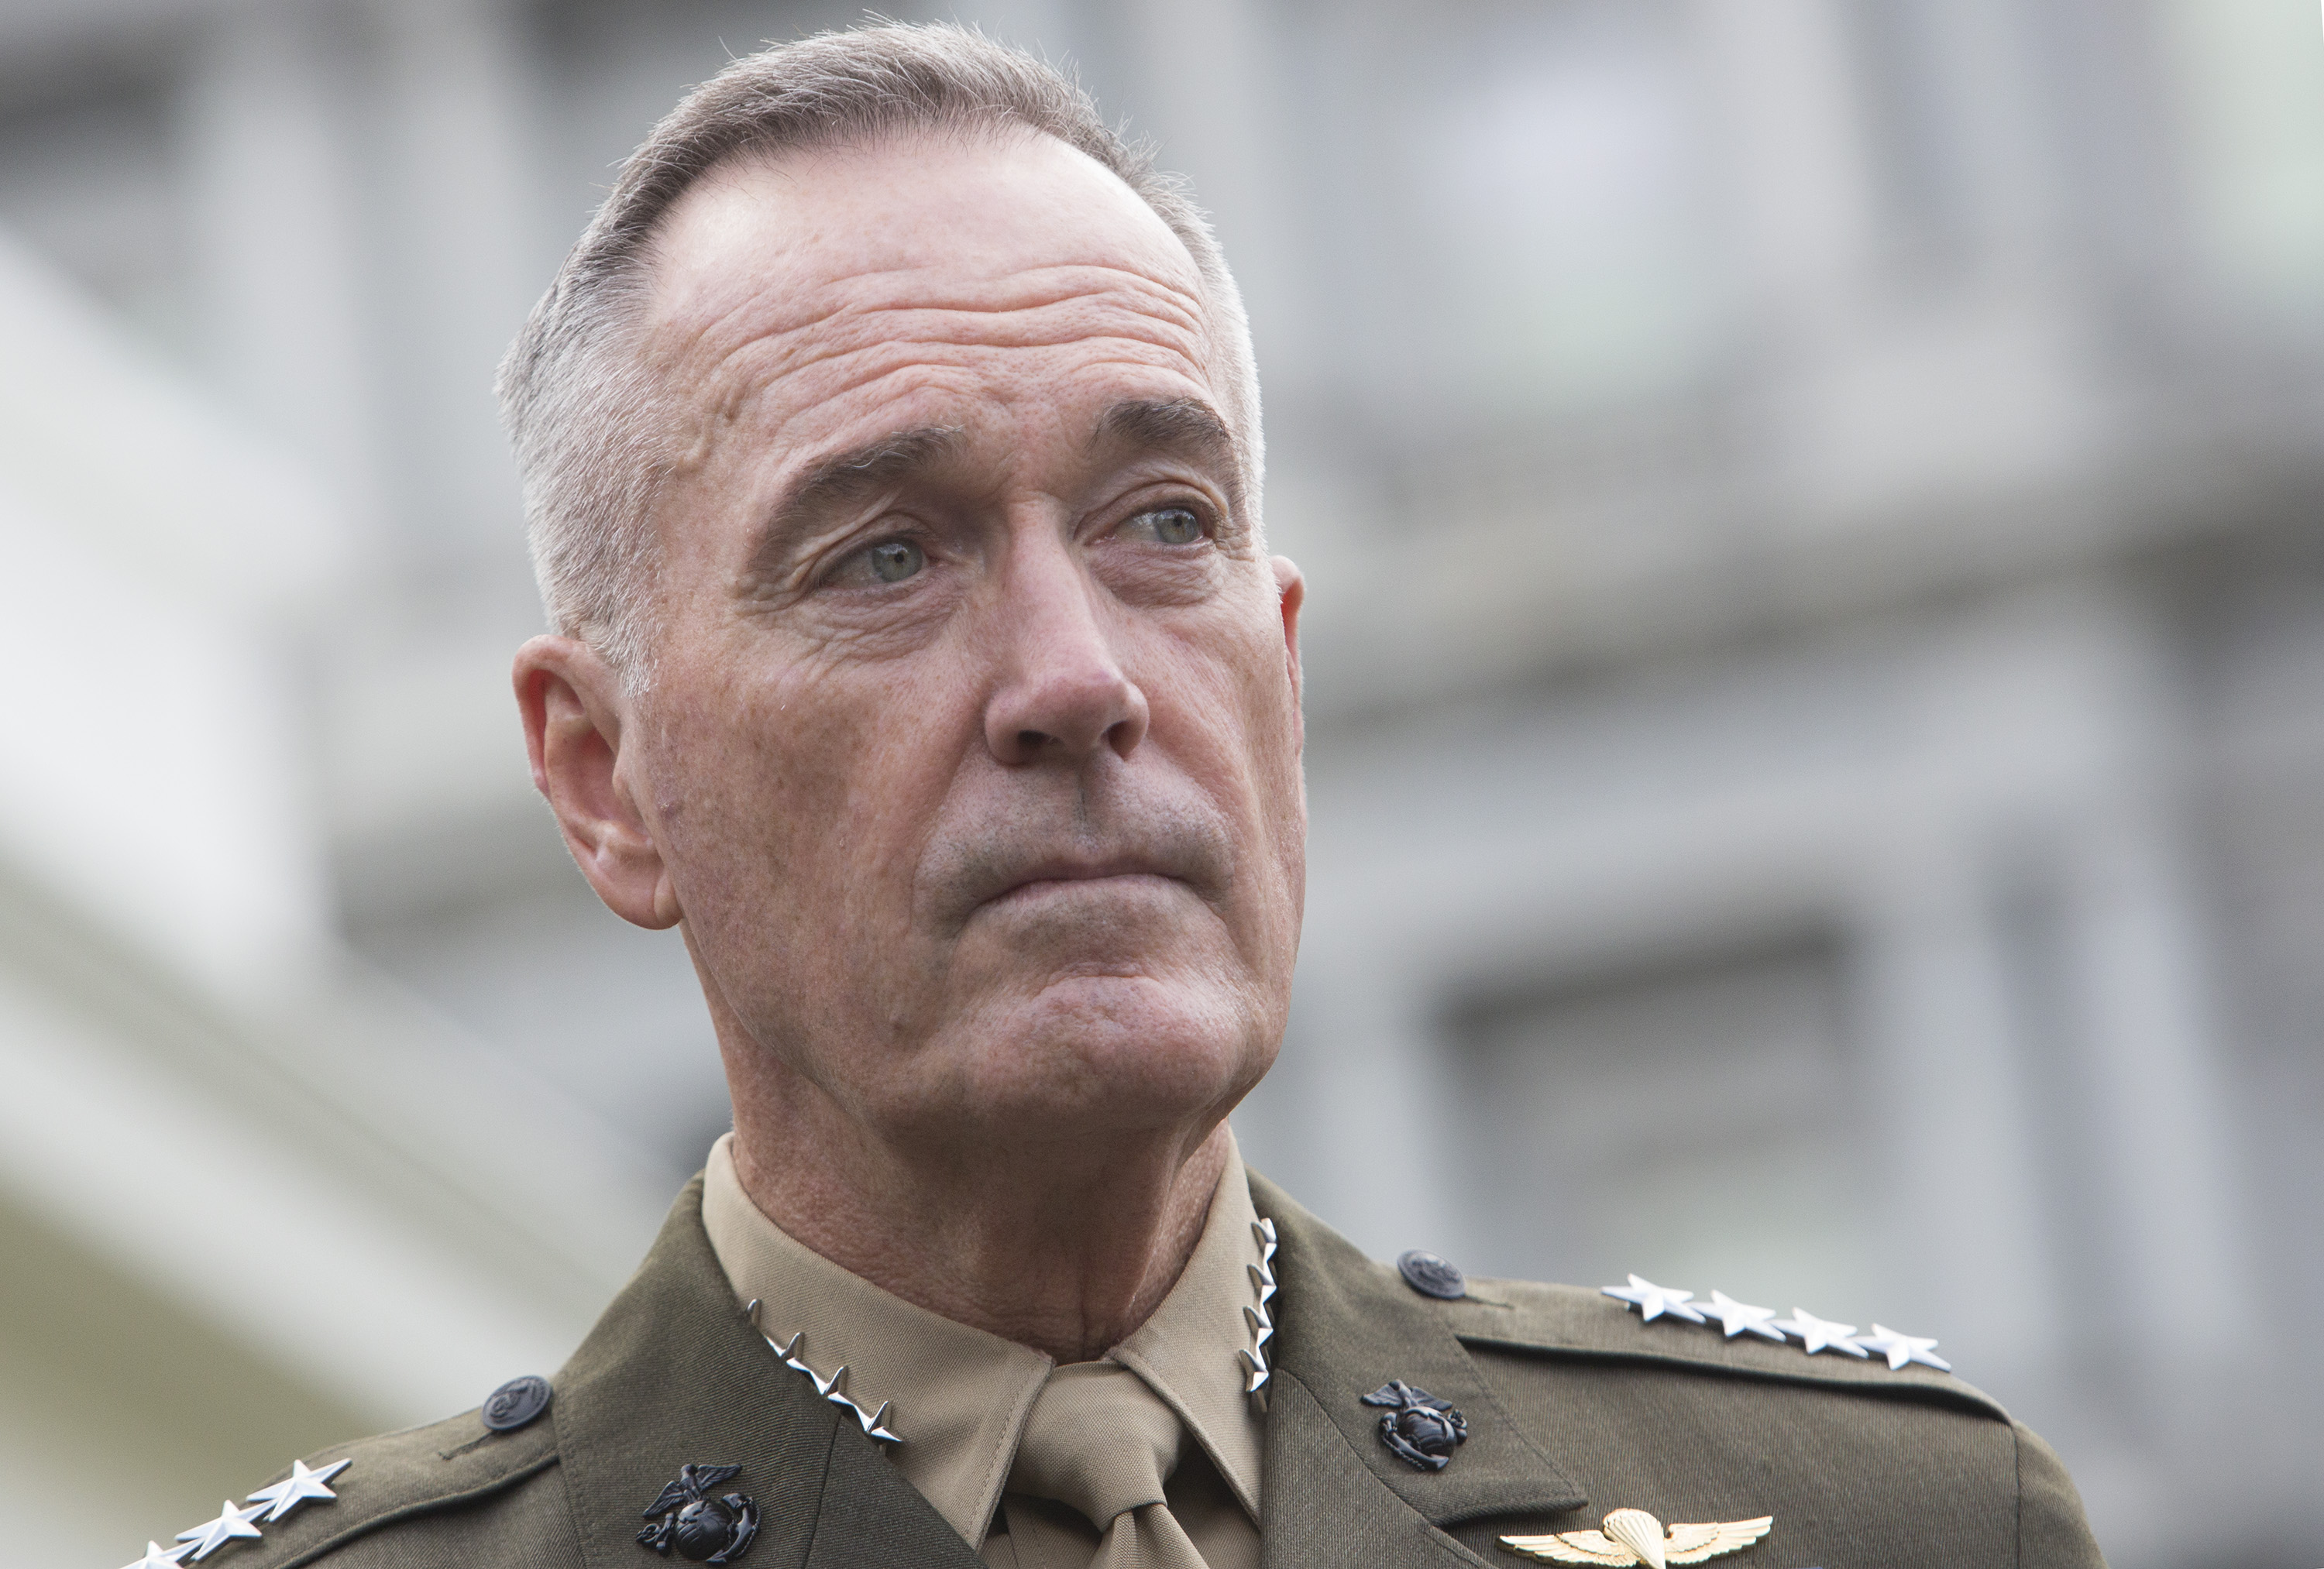 Chairman of the Joint Chiefs of Staff Joseph Dunford at the White House on Sept. 3, 2017. (Chris Kleponis—Getty Images)